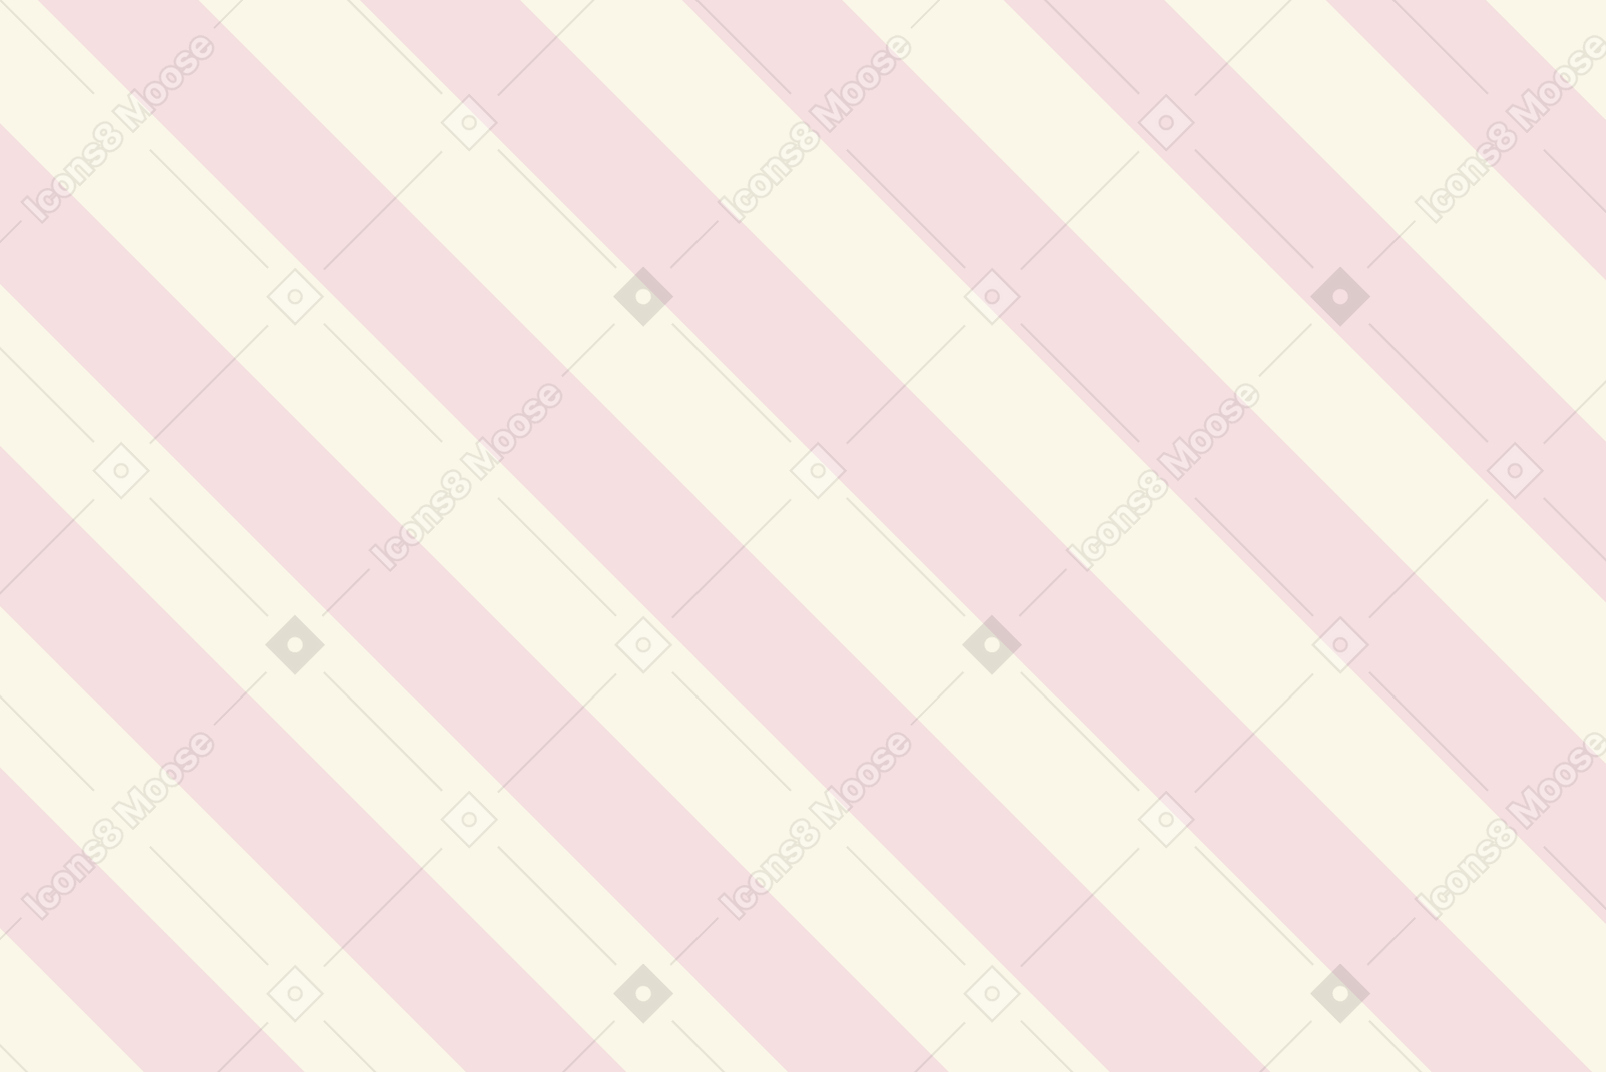 Pastel pink and white striped background